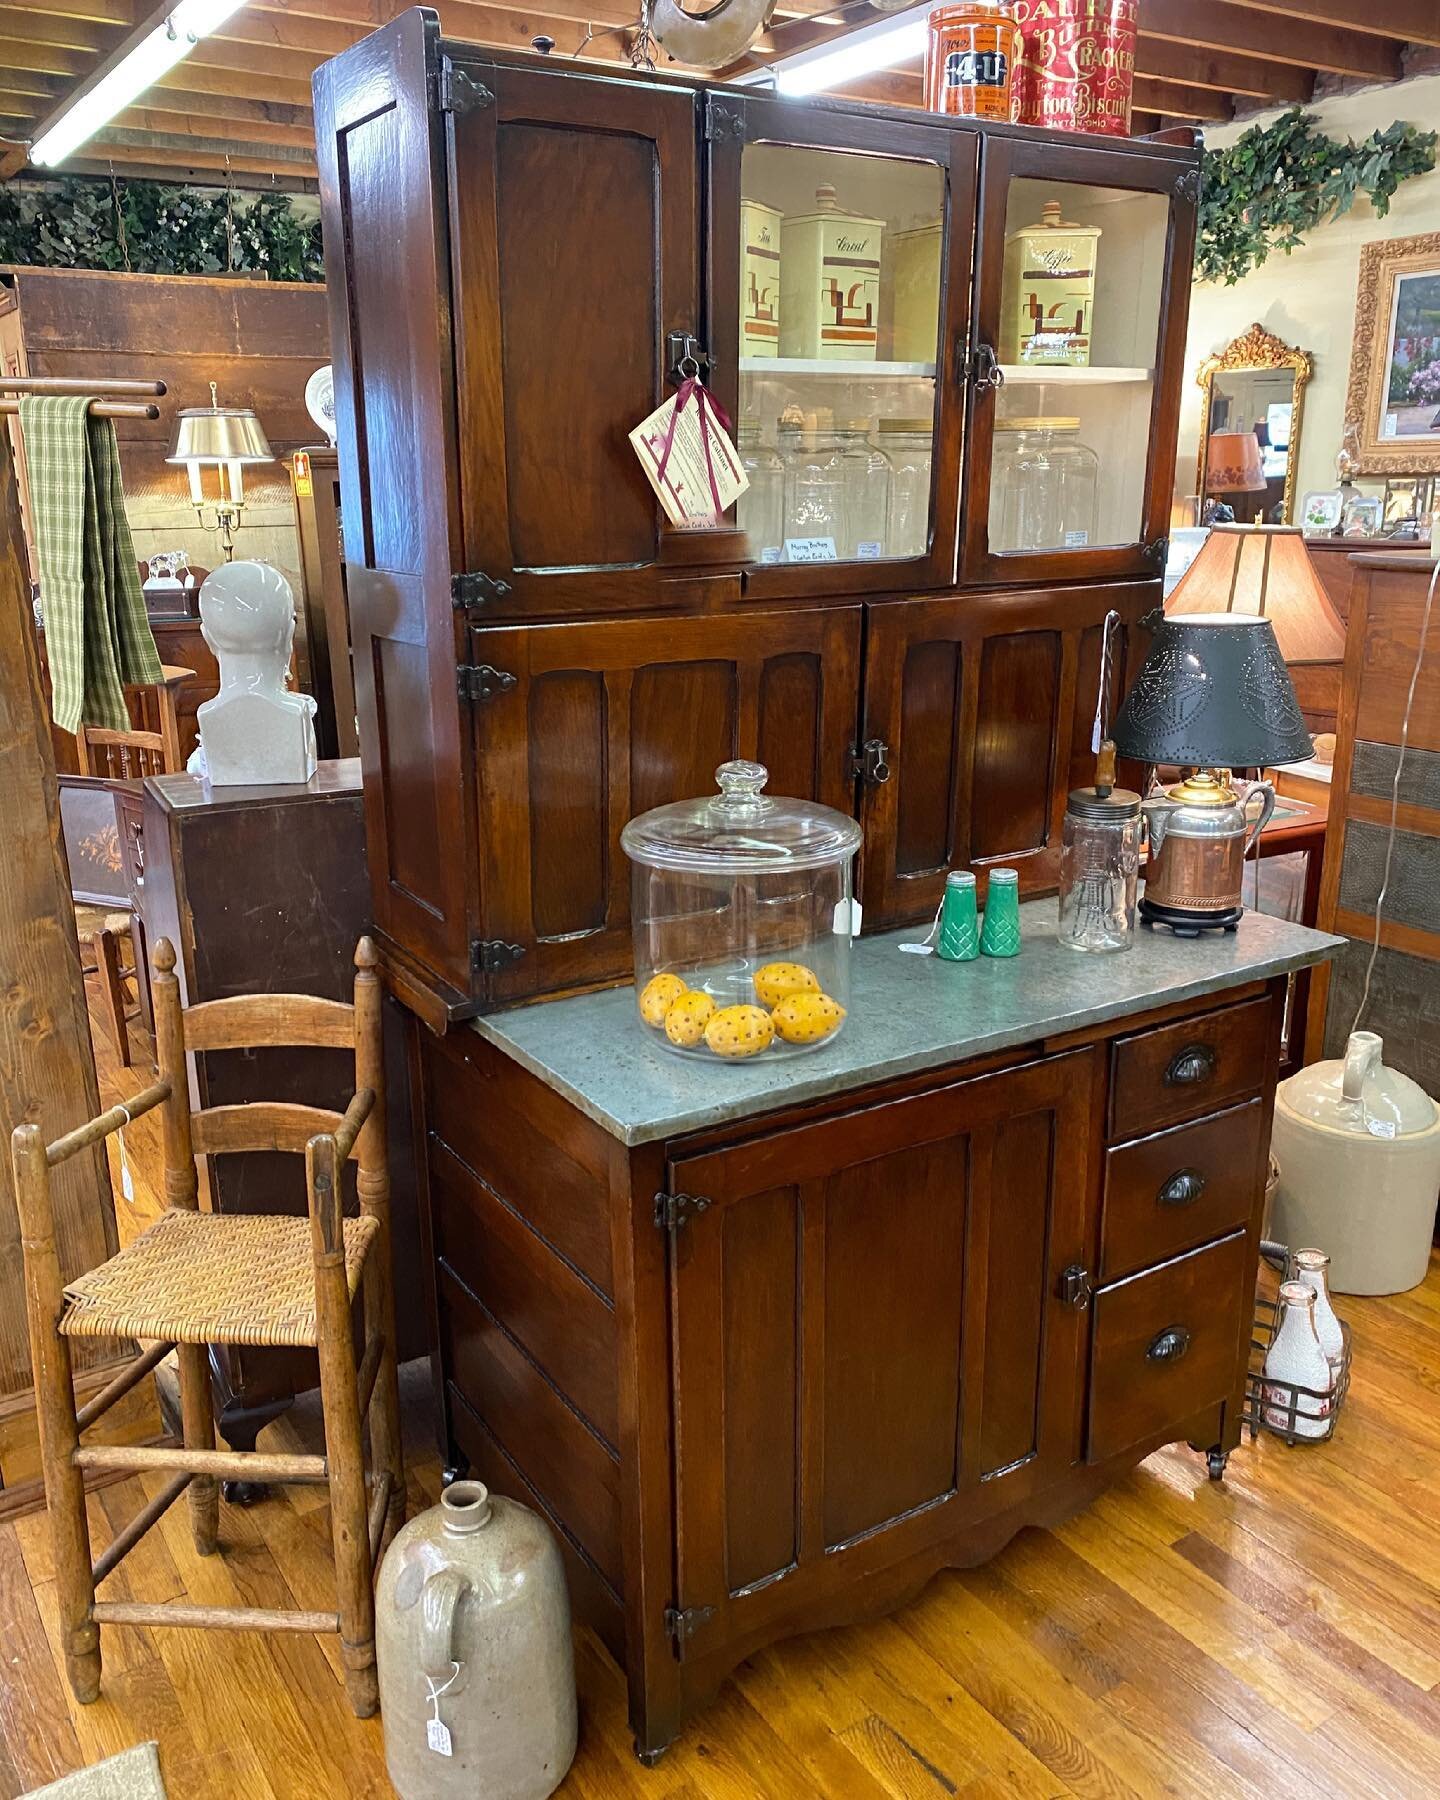 Boone kitchen cabinet circa 1930s.... Original hardware and tin working surface.... Exceptionally restored.... Offered at The Antique Market in Clinton Tennessee....